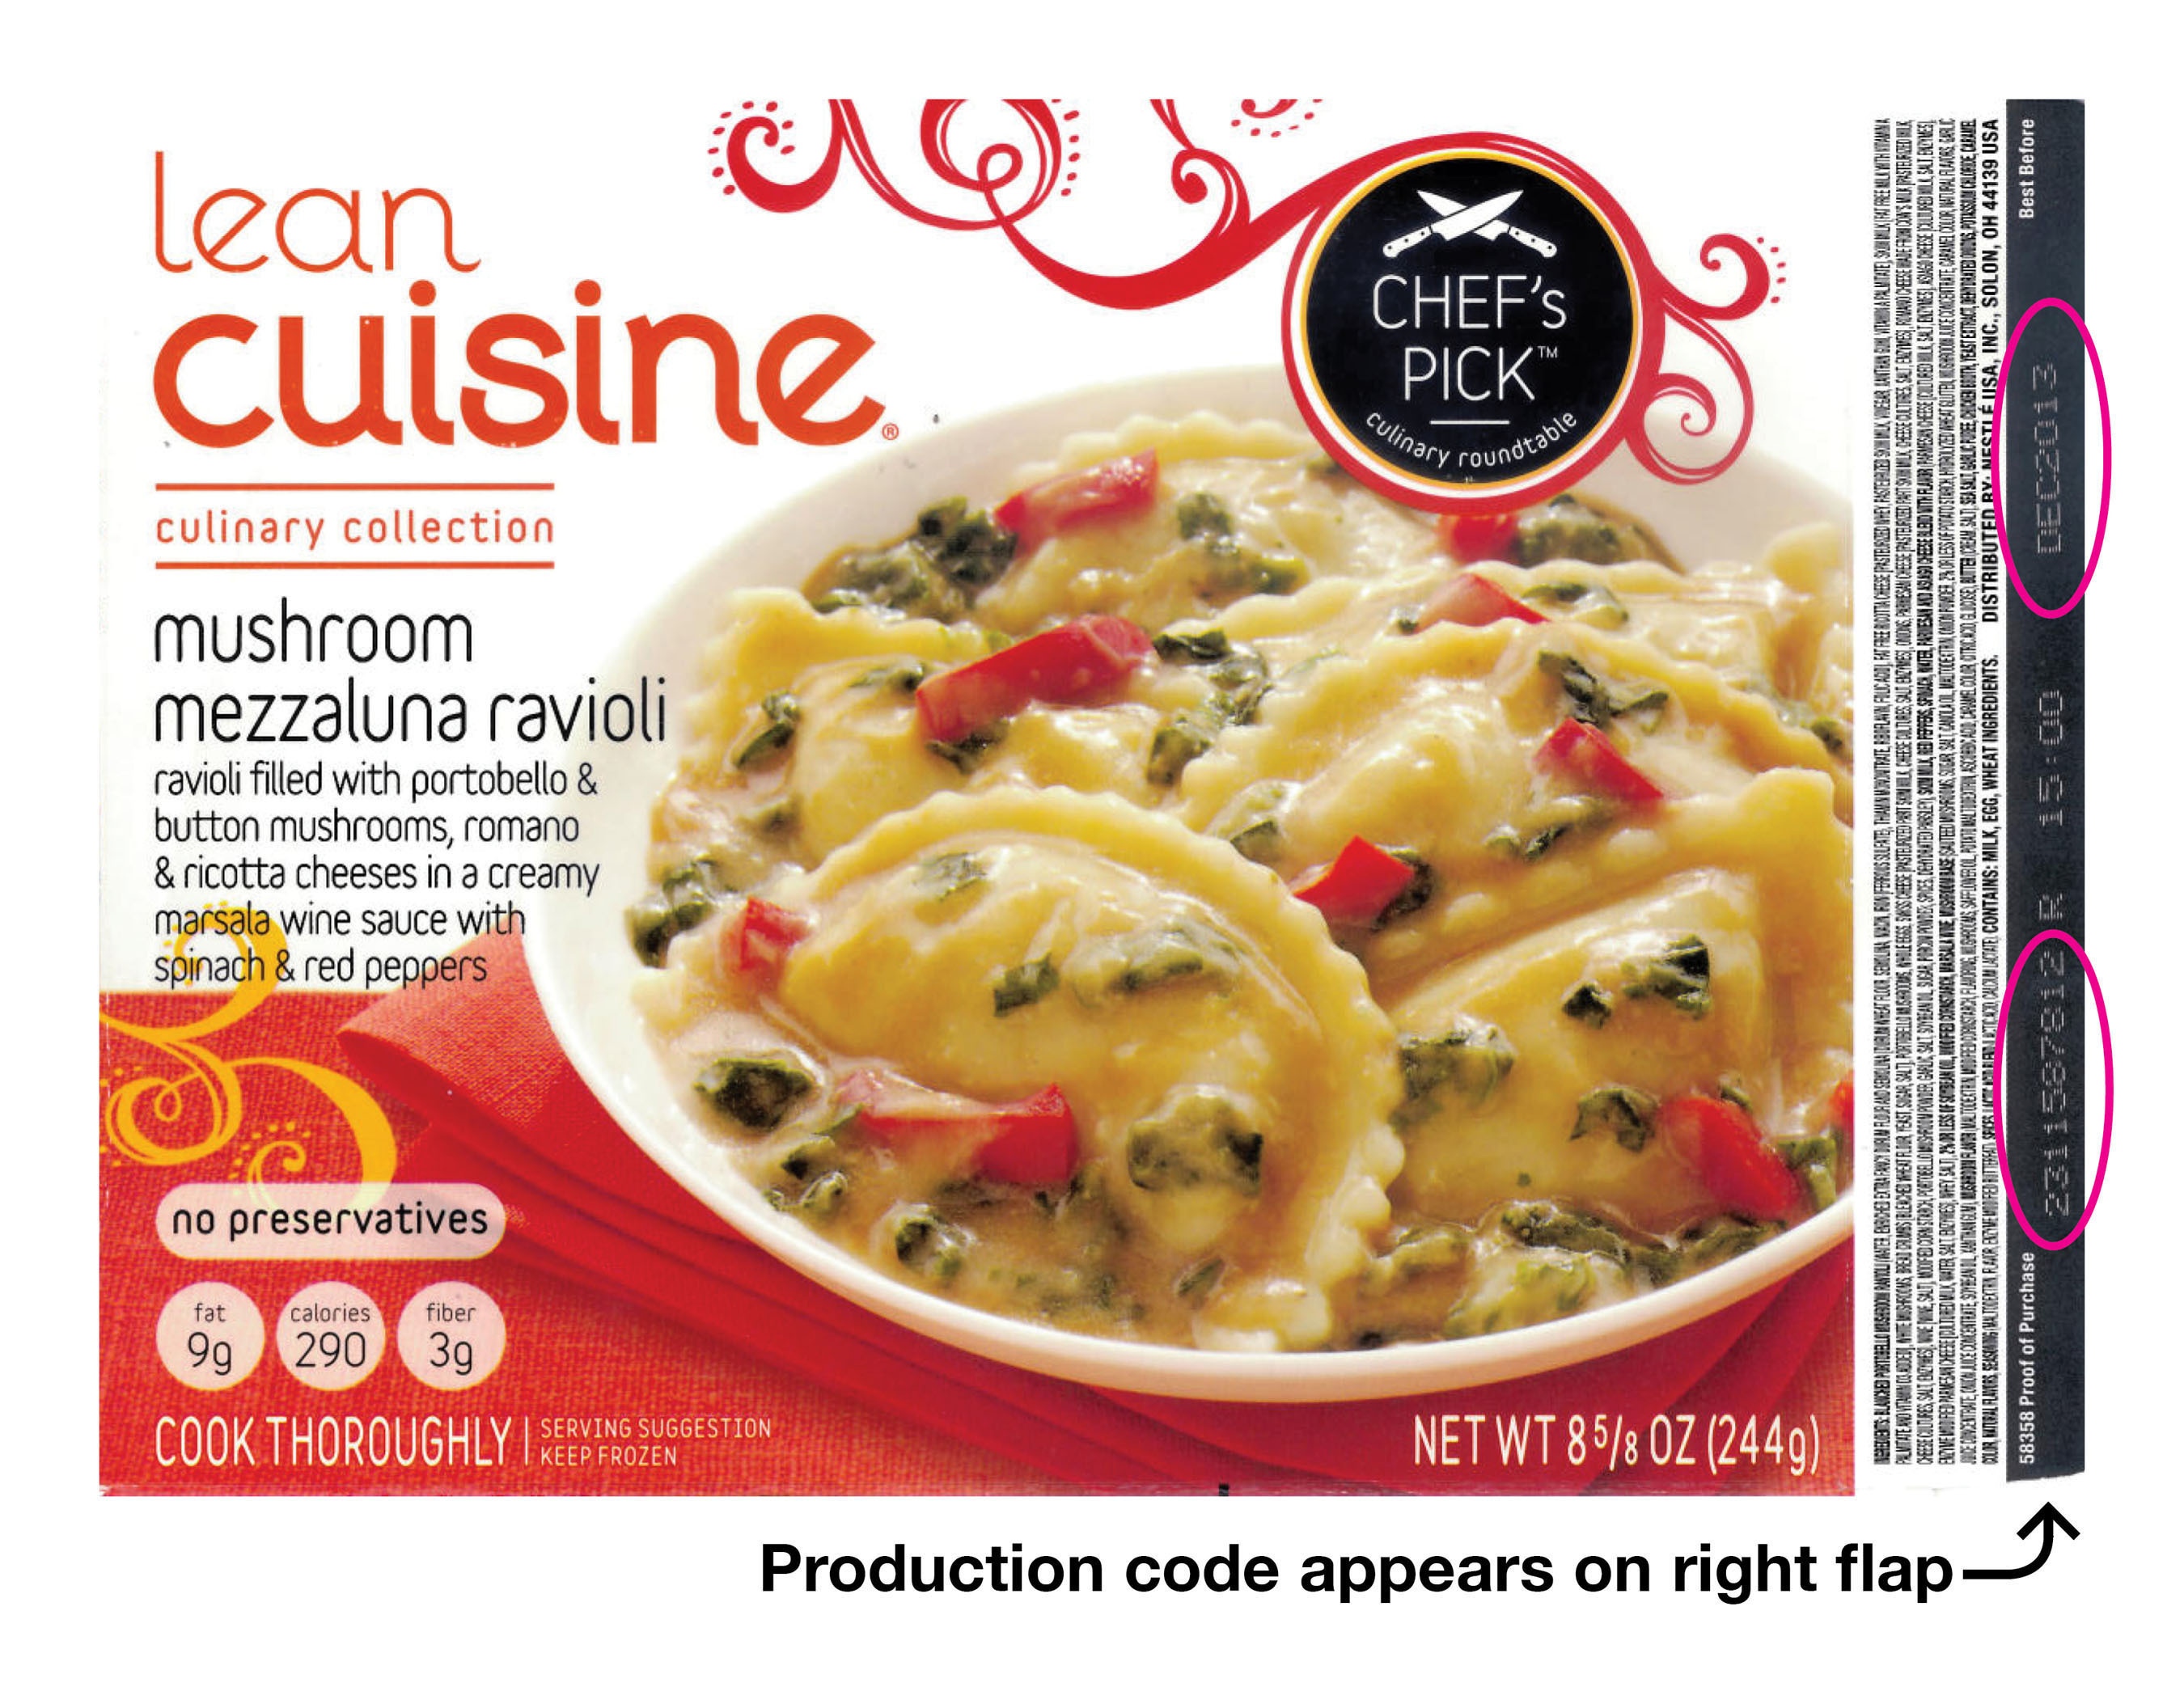 Nestle is voluntarily recalling LEAN CUISINE(R) Culinary Collection Mushroom Mezzaluna Ravioli with production codes 2311587812 and 2312587812; the "best before date" appears as DEC 2013. (PRNewsFoto/Nestle USA) (PRNewsFoto/NESTLE USA)